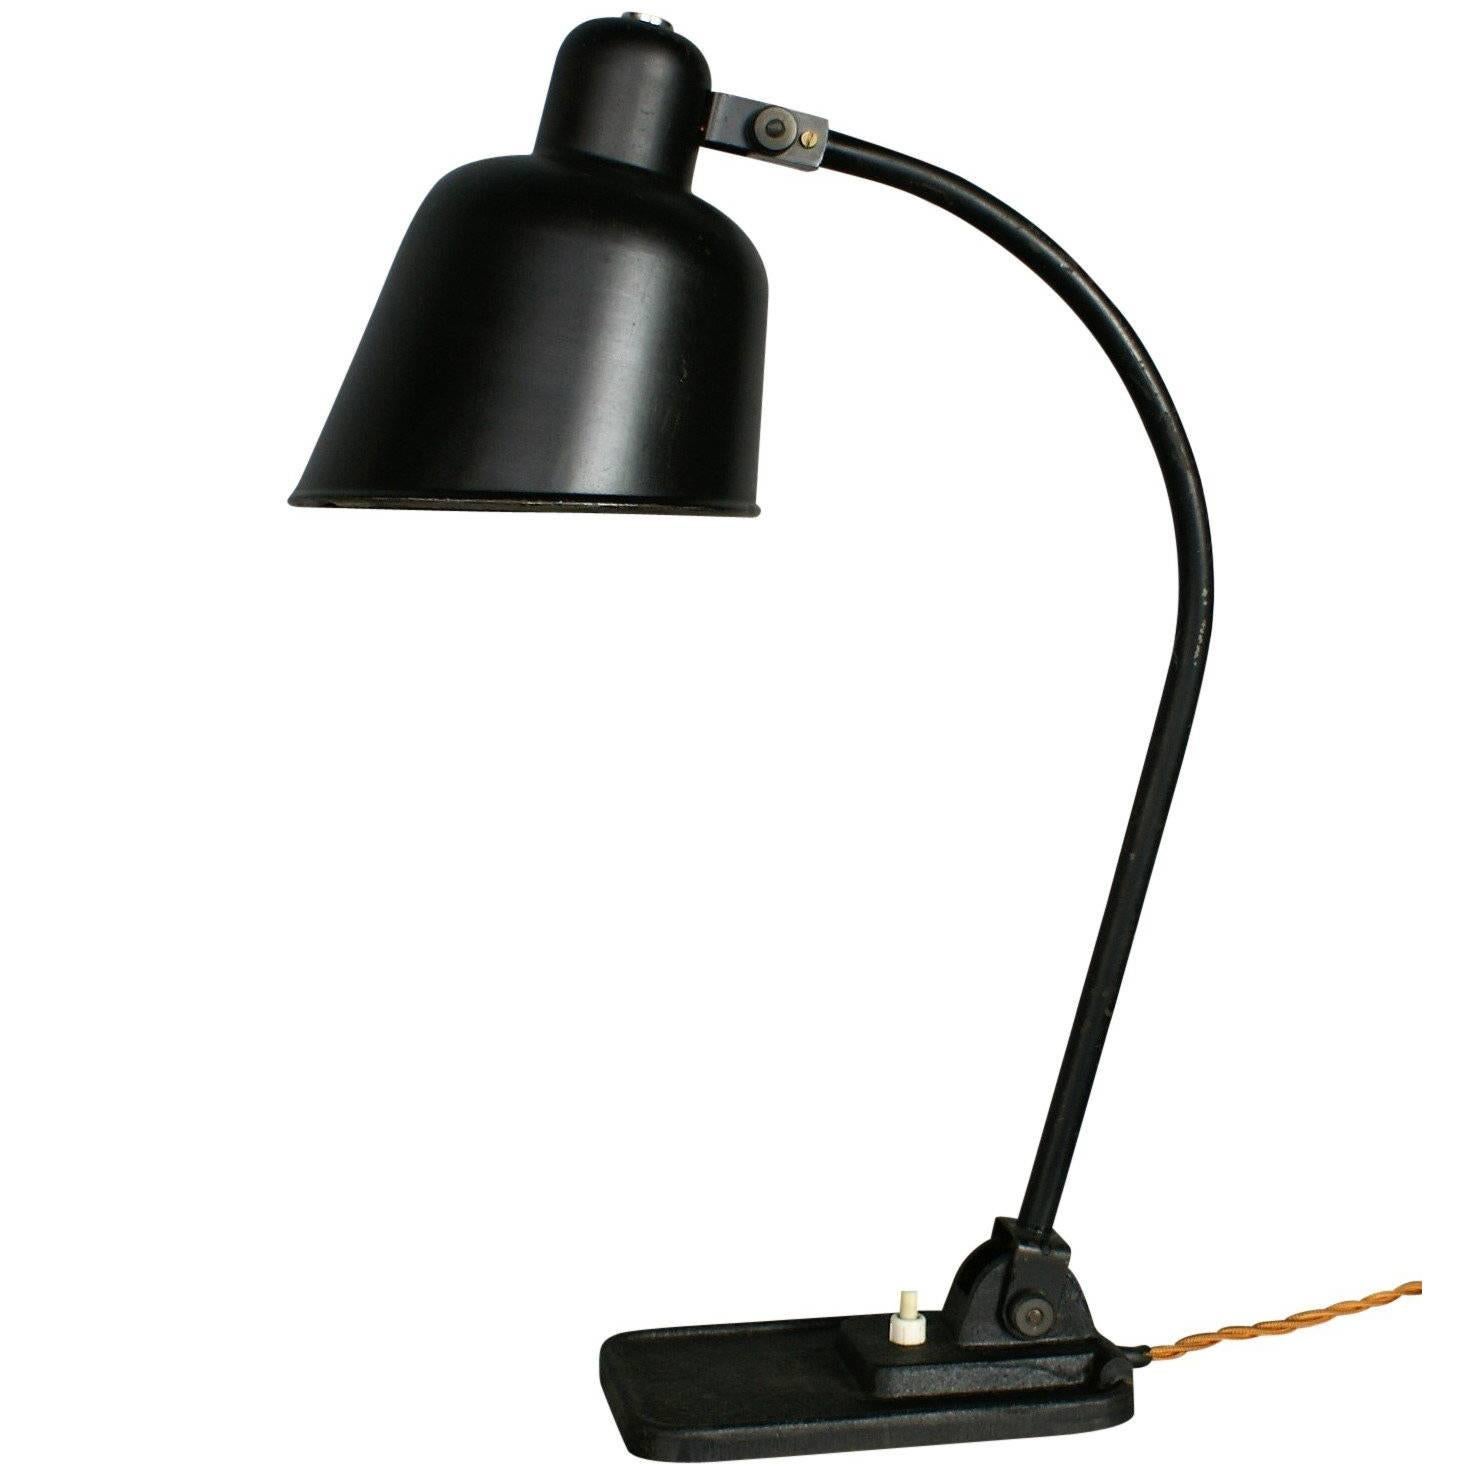 Christian Dell Black Lacquered Bauhaus Table Lamp, 1930s Germany